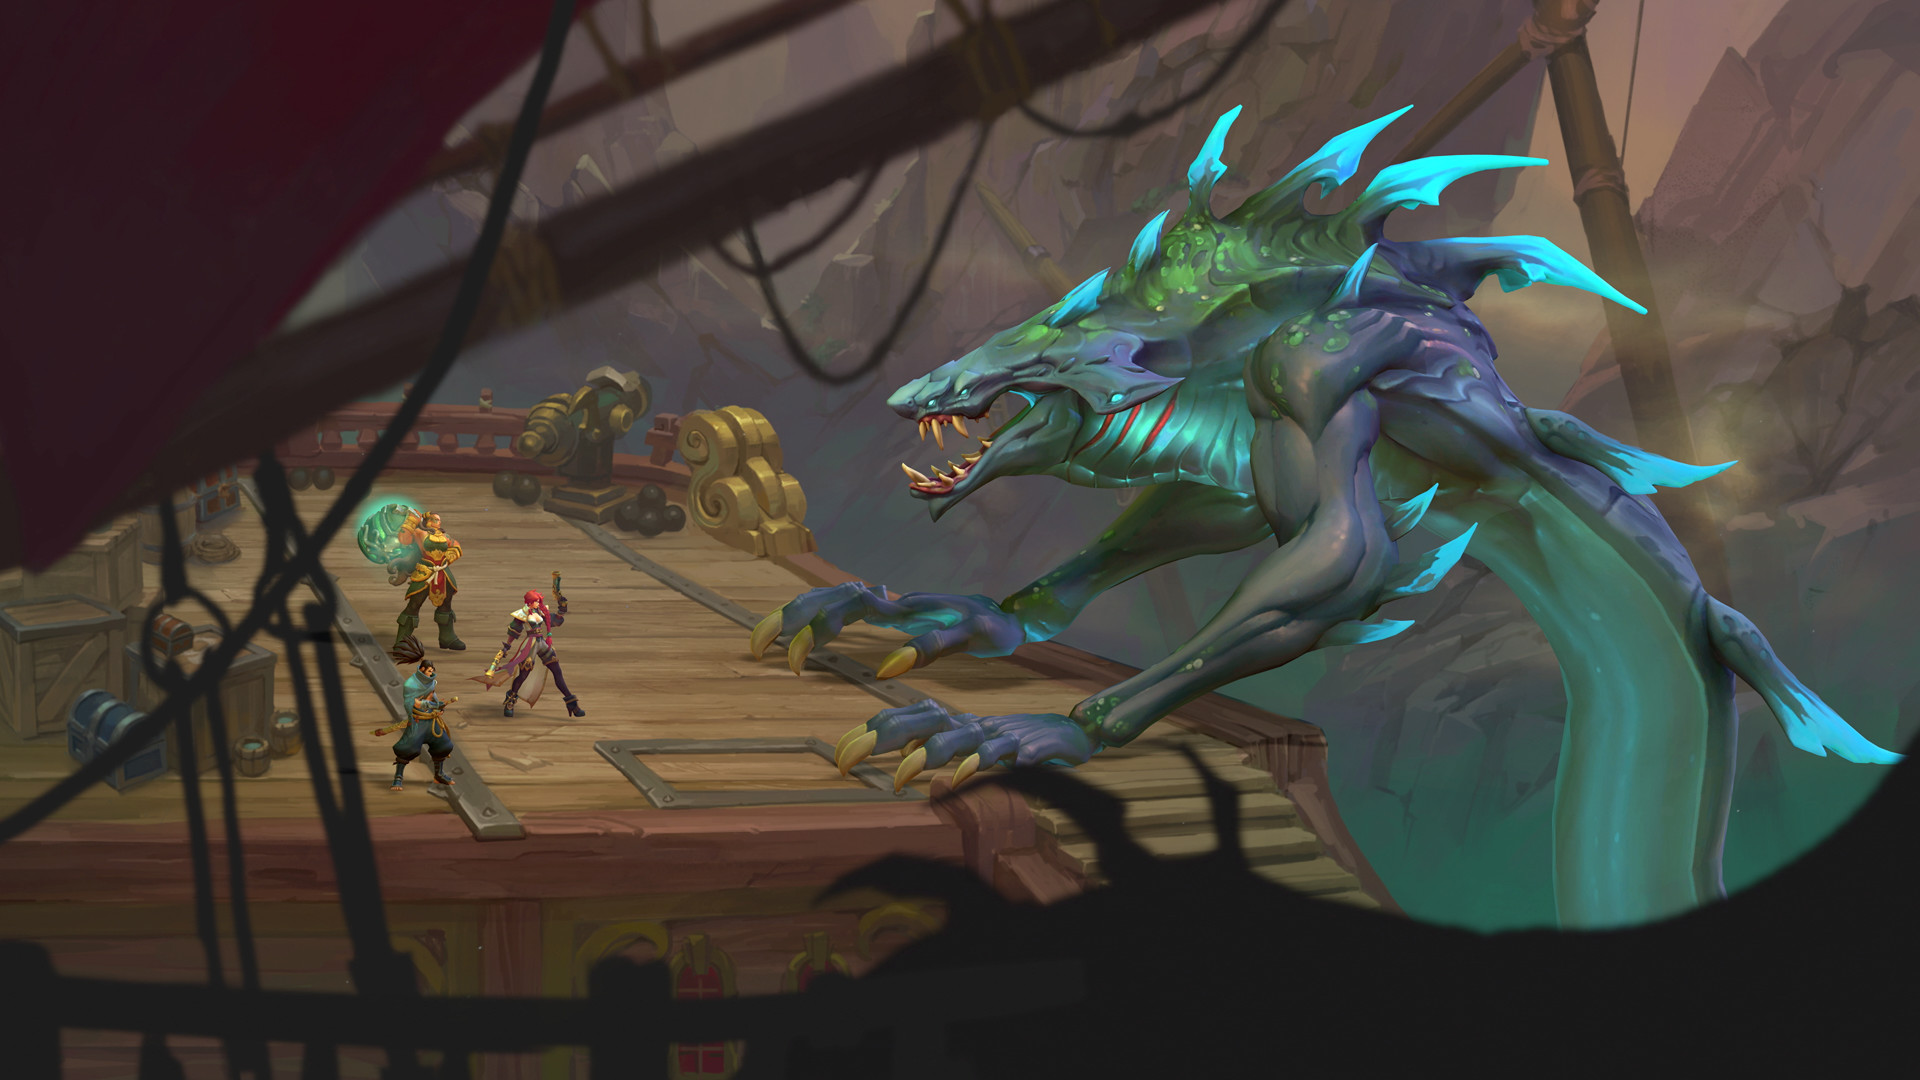 Ruined King: A League of Legends Story - Miss Fortune, Illaoi, and Yasuo stand off against a giant lizard on the bow of a pirate ship